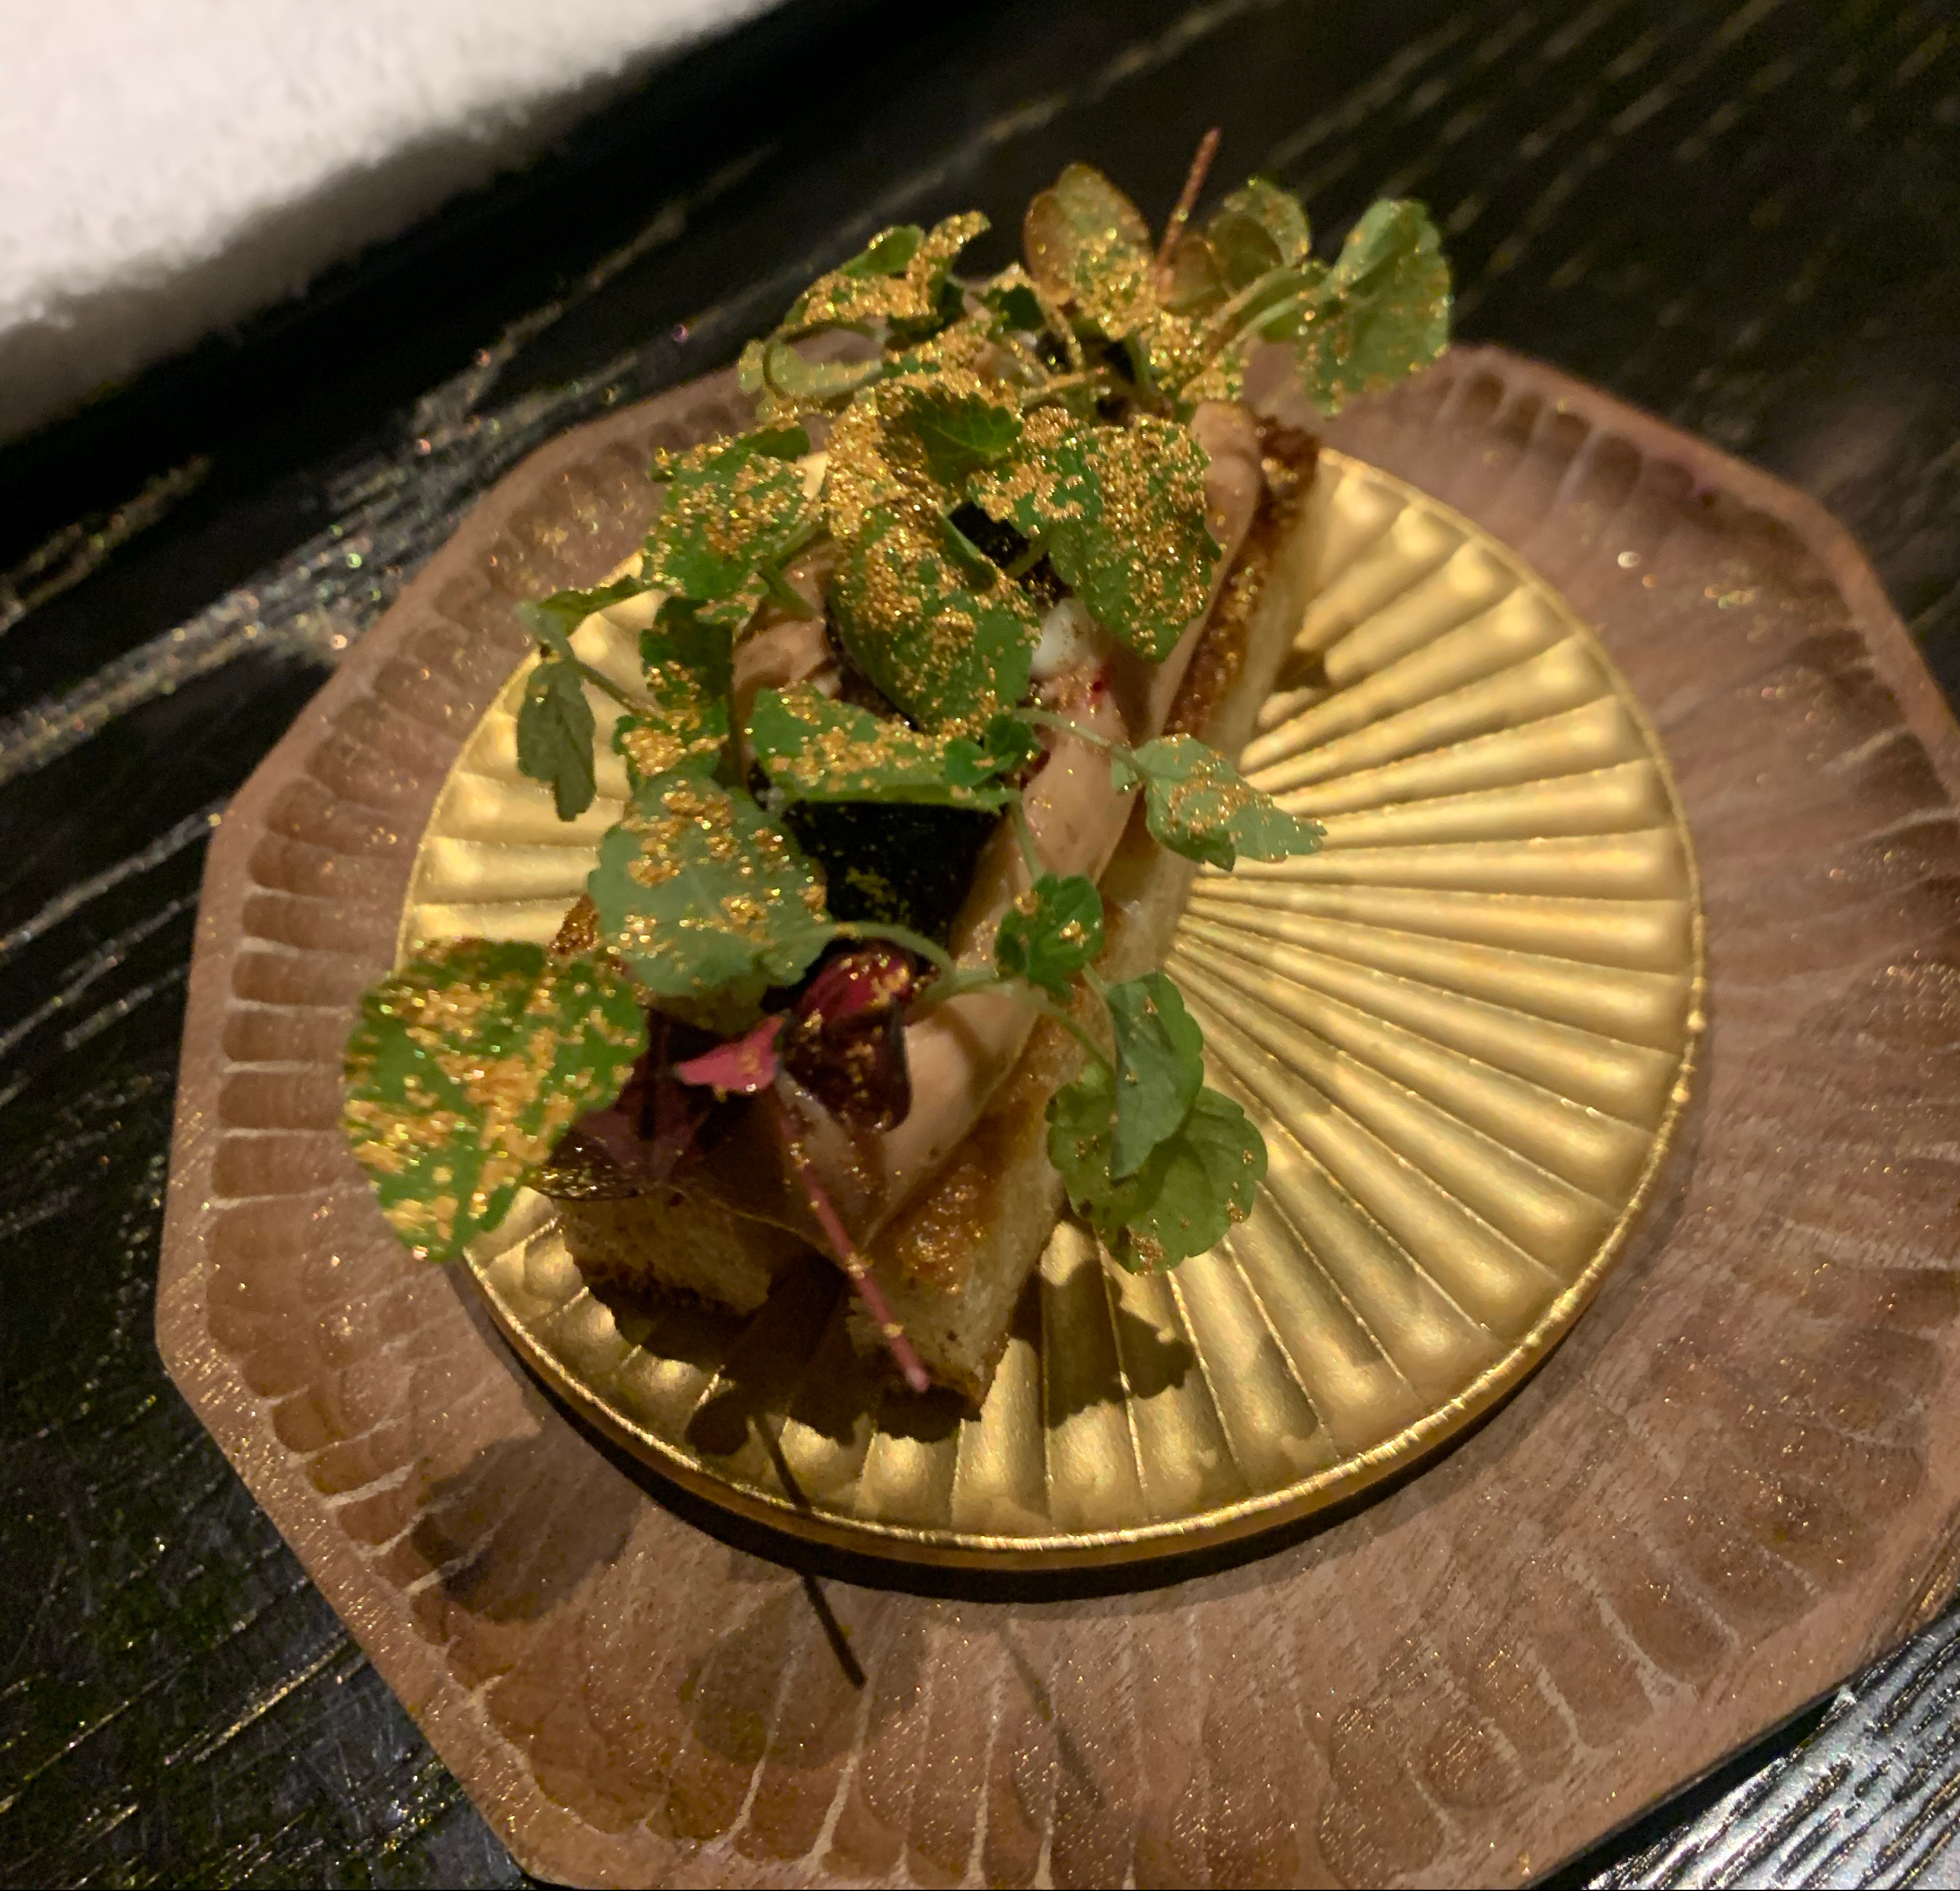 Toast topped with mouse, microgreens, and tons of gold dust on a golden plate